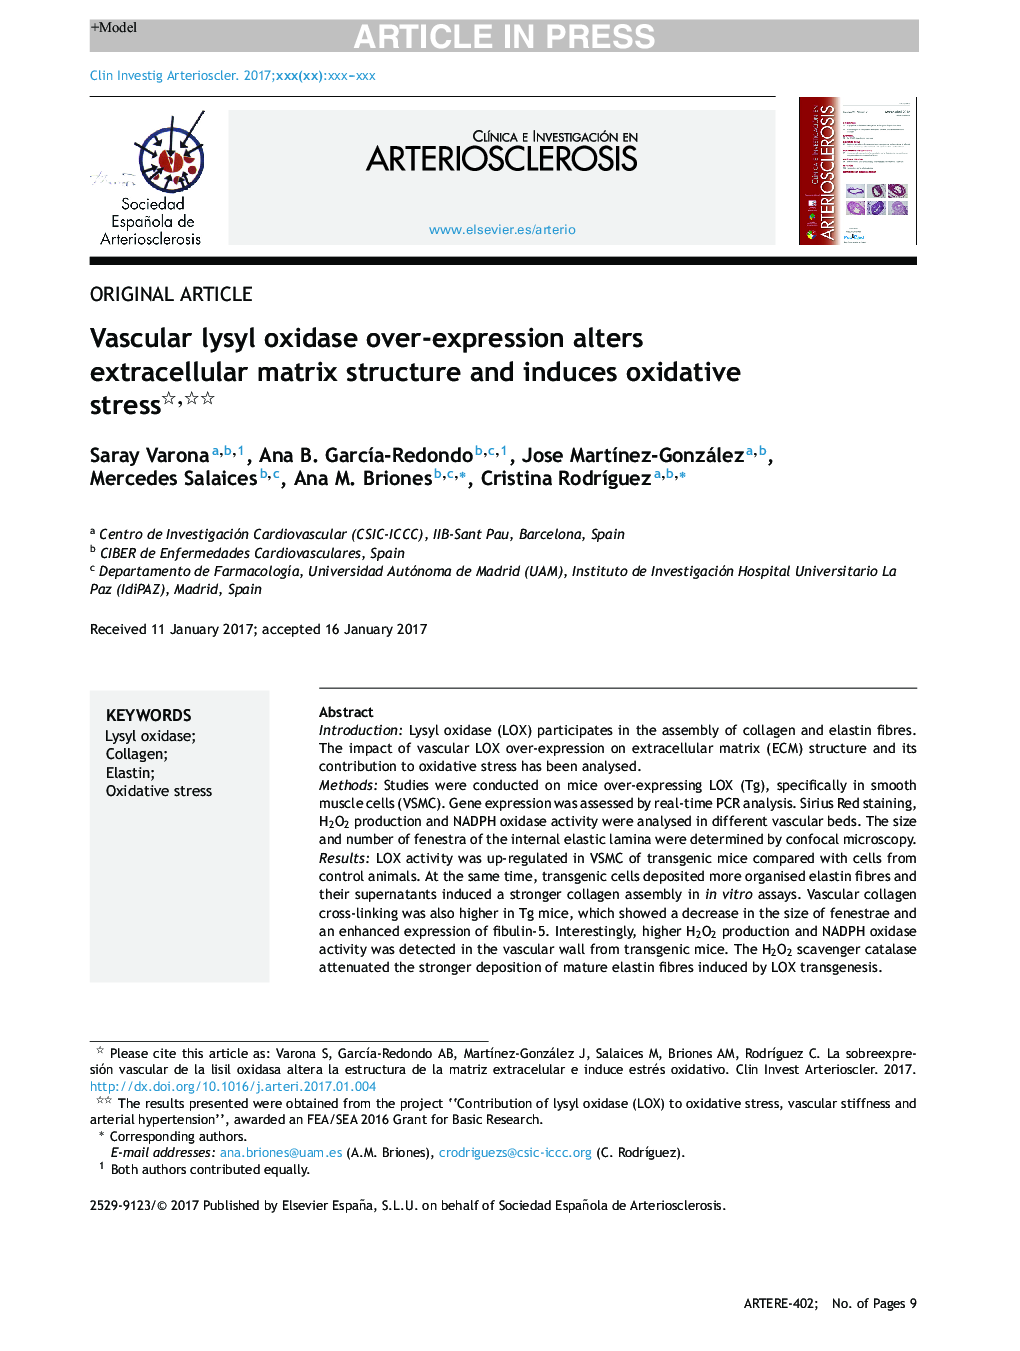 Vascular lysyl oxidase over-expression alters extracellular matrix structure and induces oxidative stress